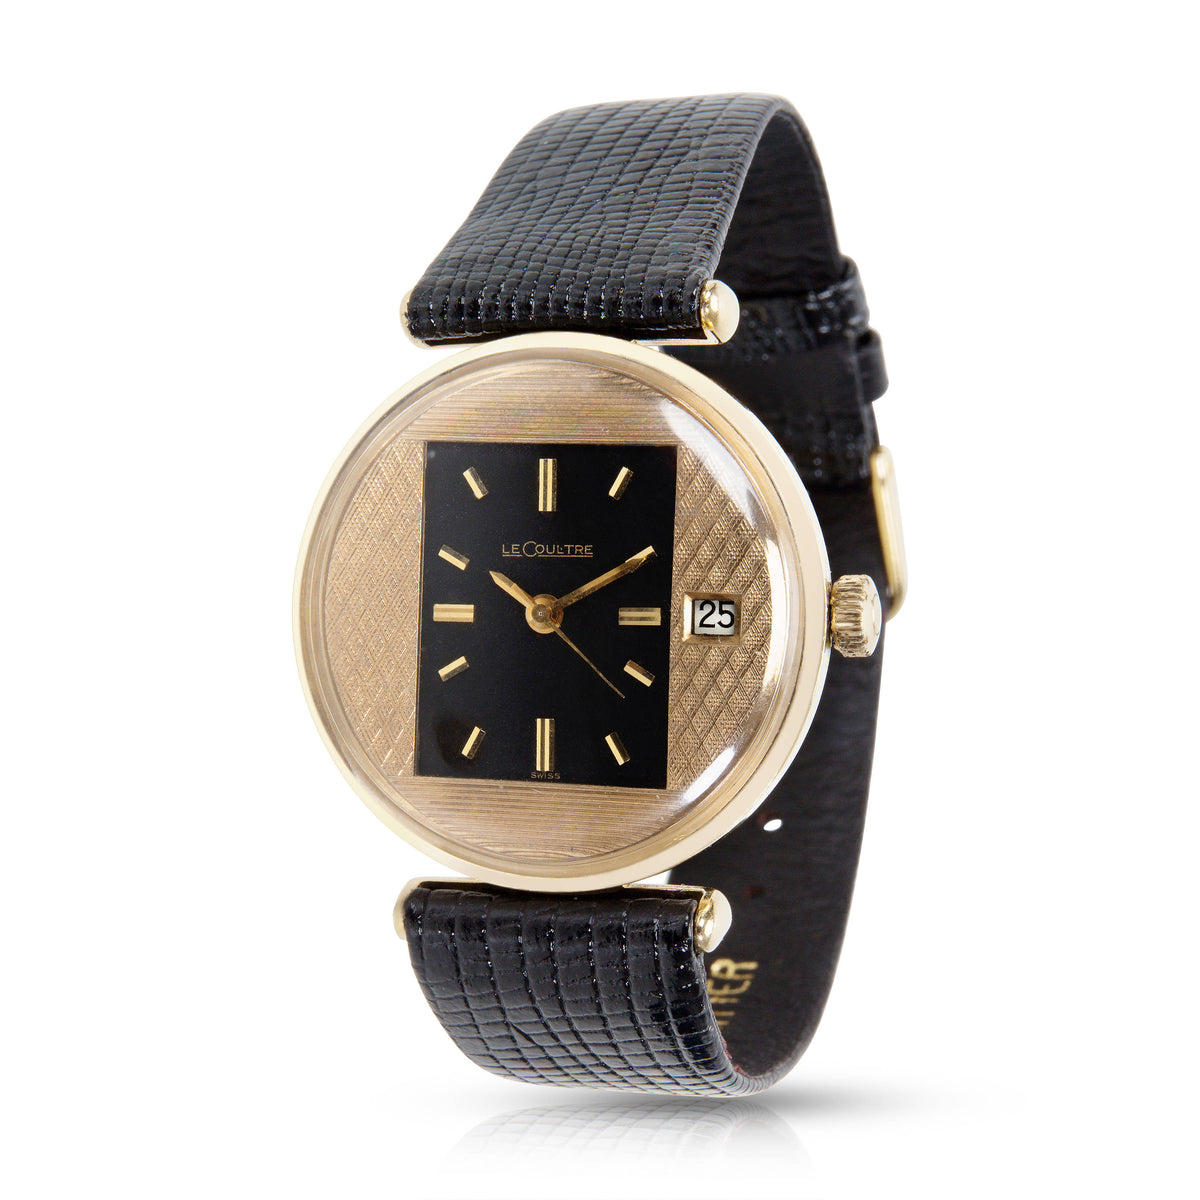 LeCoultre Vintage Men's Watch in 14K Yellow Gold